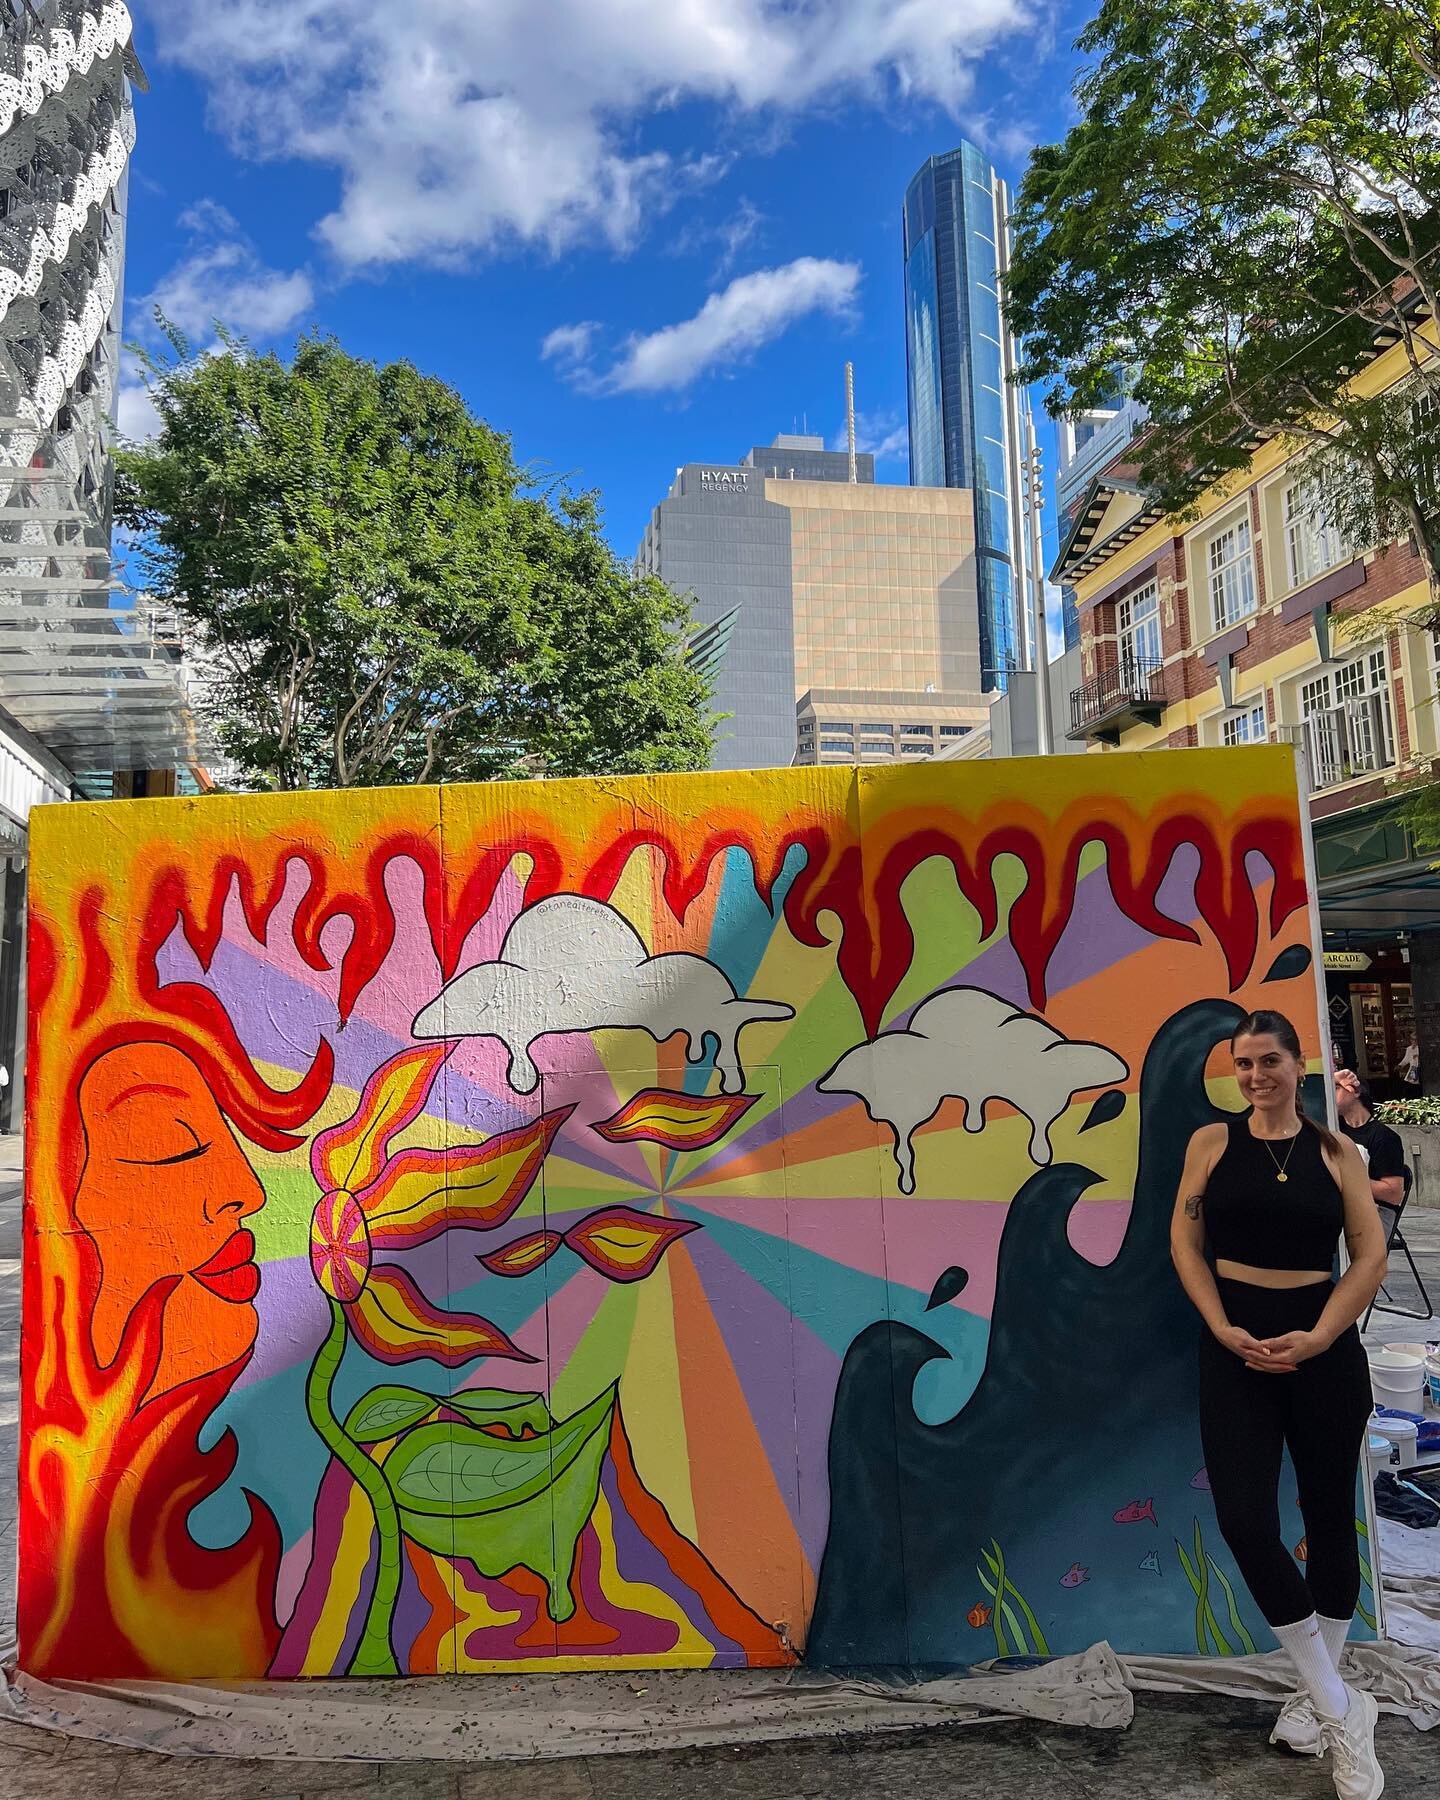 Proud of this one 🌬️

@bsafest @queenstreetmall thanks for having me! 

Go check it out before it's goneeee, opposite H&amp;M and UNIQLO on Brisbane's Queen Street Mall ❤️

#brisbane #brisbanestreetart #mural #muralist #femalepainter #ladieswhopaint